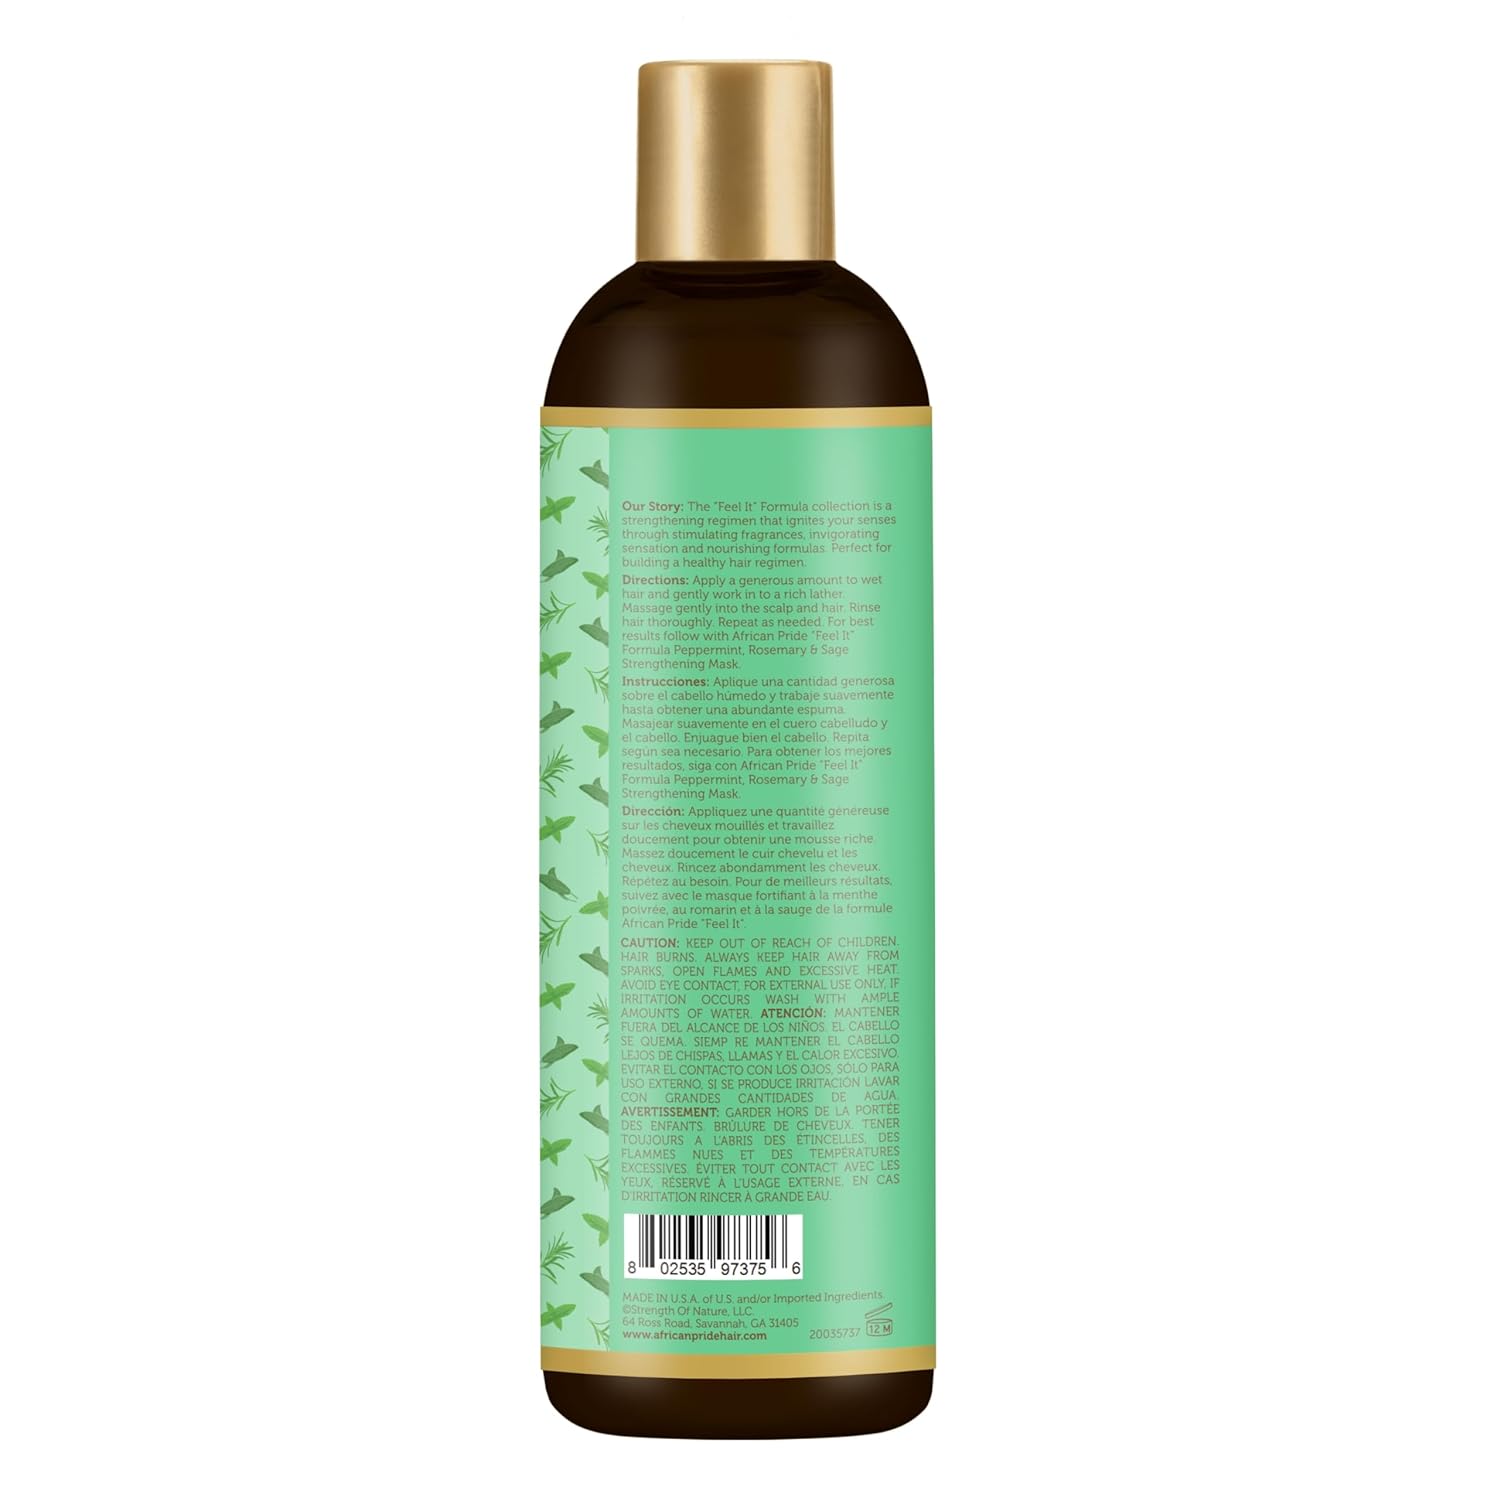 AFRICAN PRIDE Peppermint, Rosemary & Sage Strengthening Shampoo (12oz) African Pride